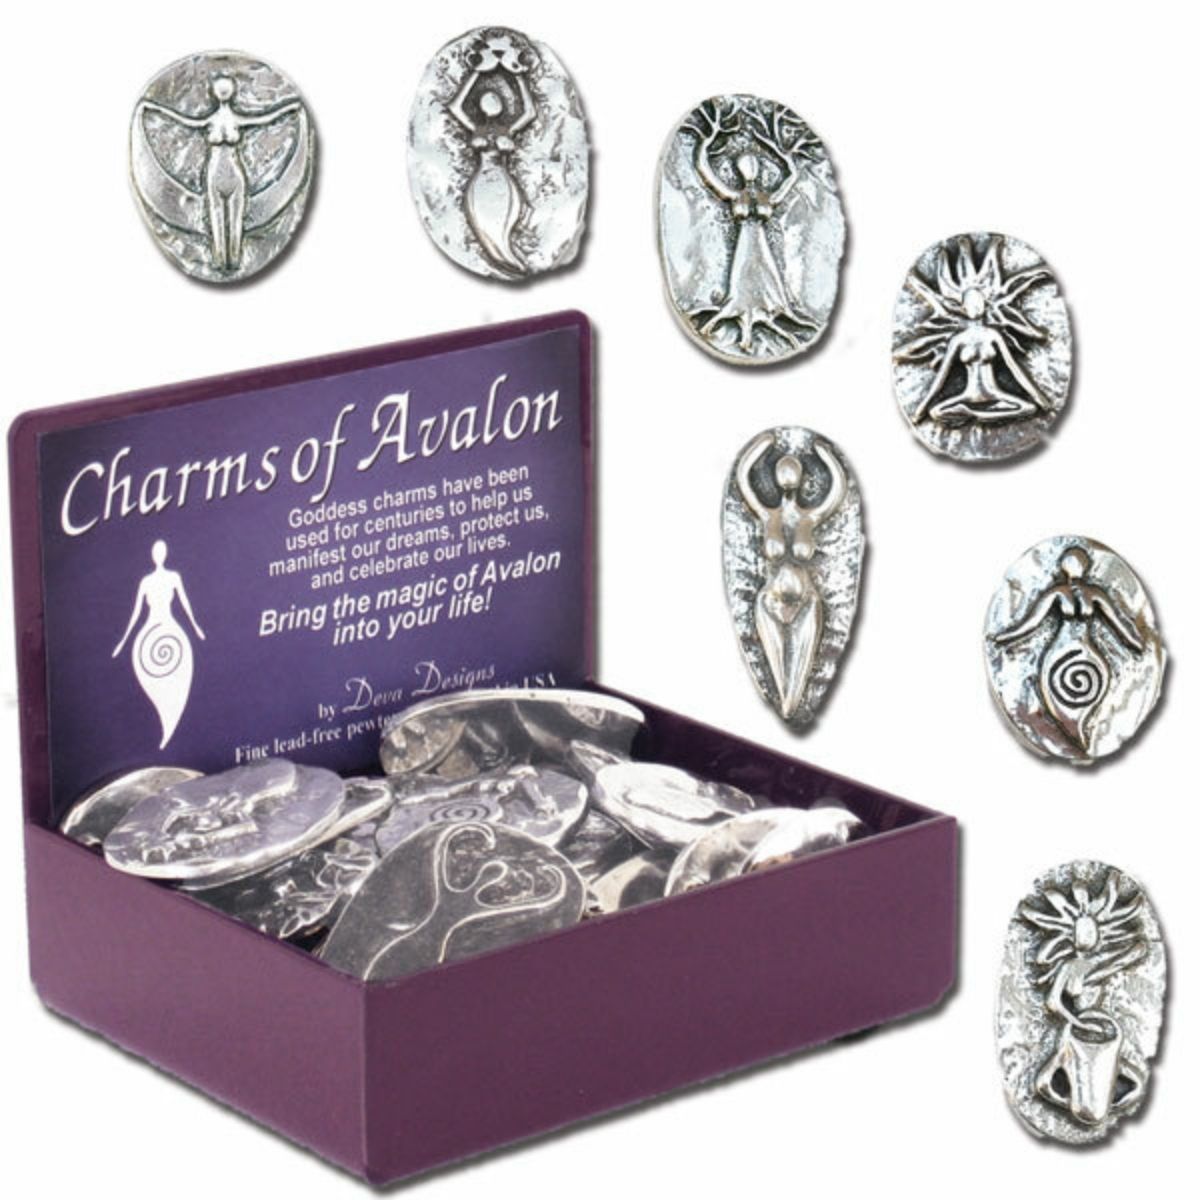 Charms of Avalon